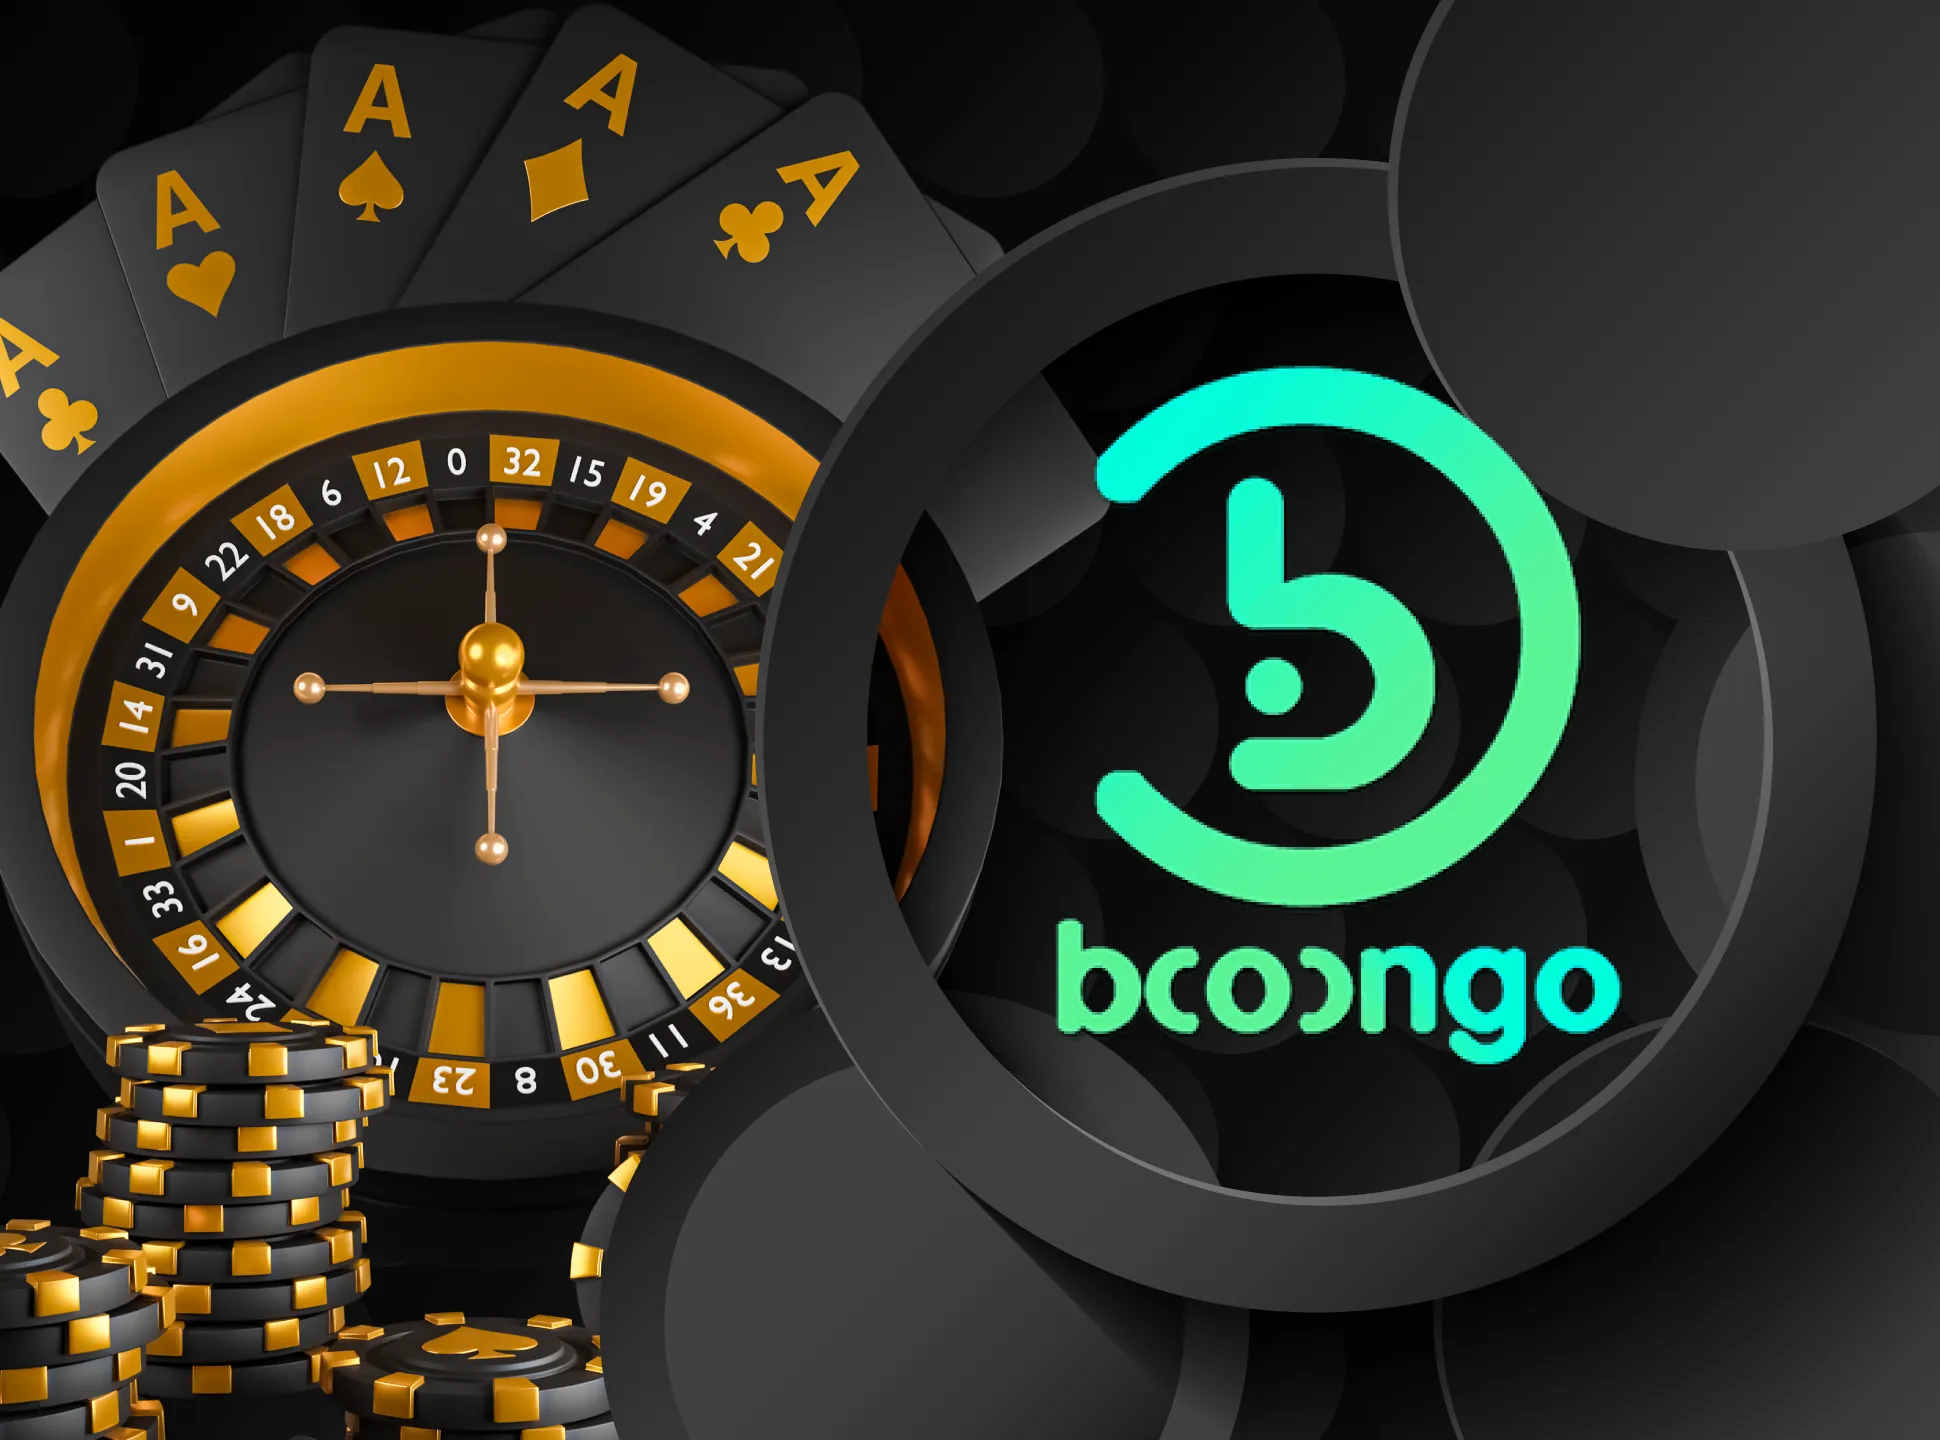 Booongo has been providing online casino with the games since 2015.